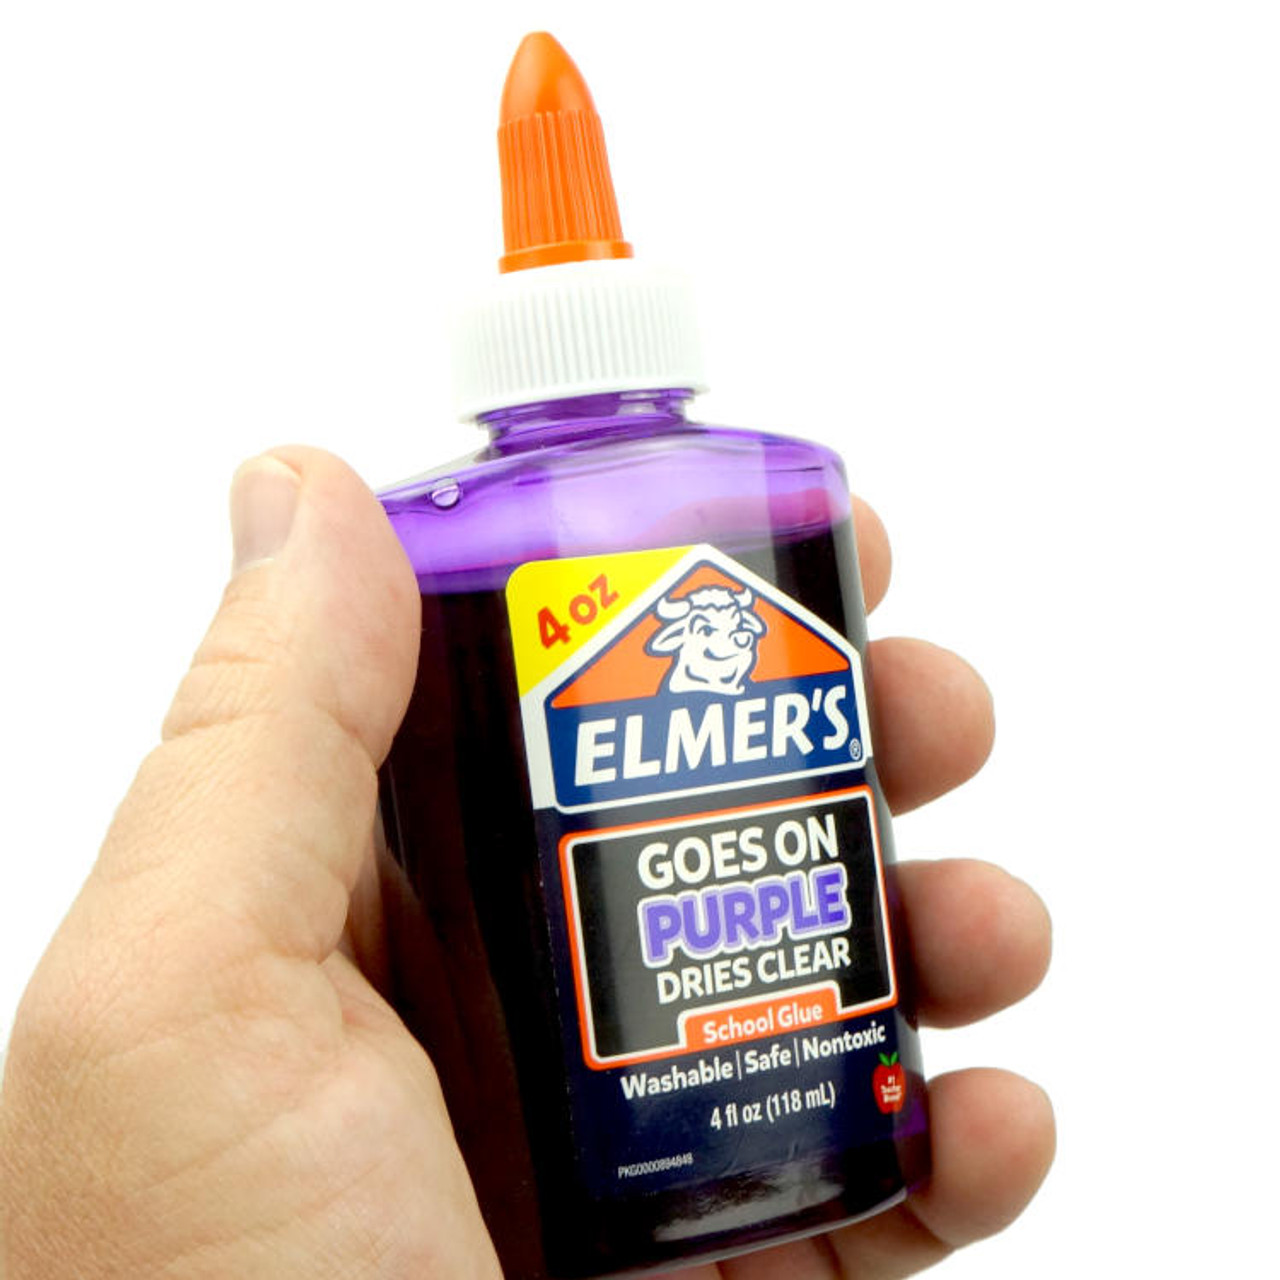 New bottle Elmer's glue goes on purple, dries clear - business